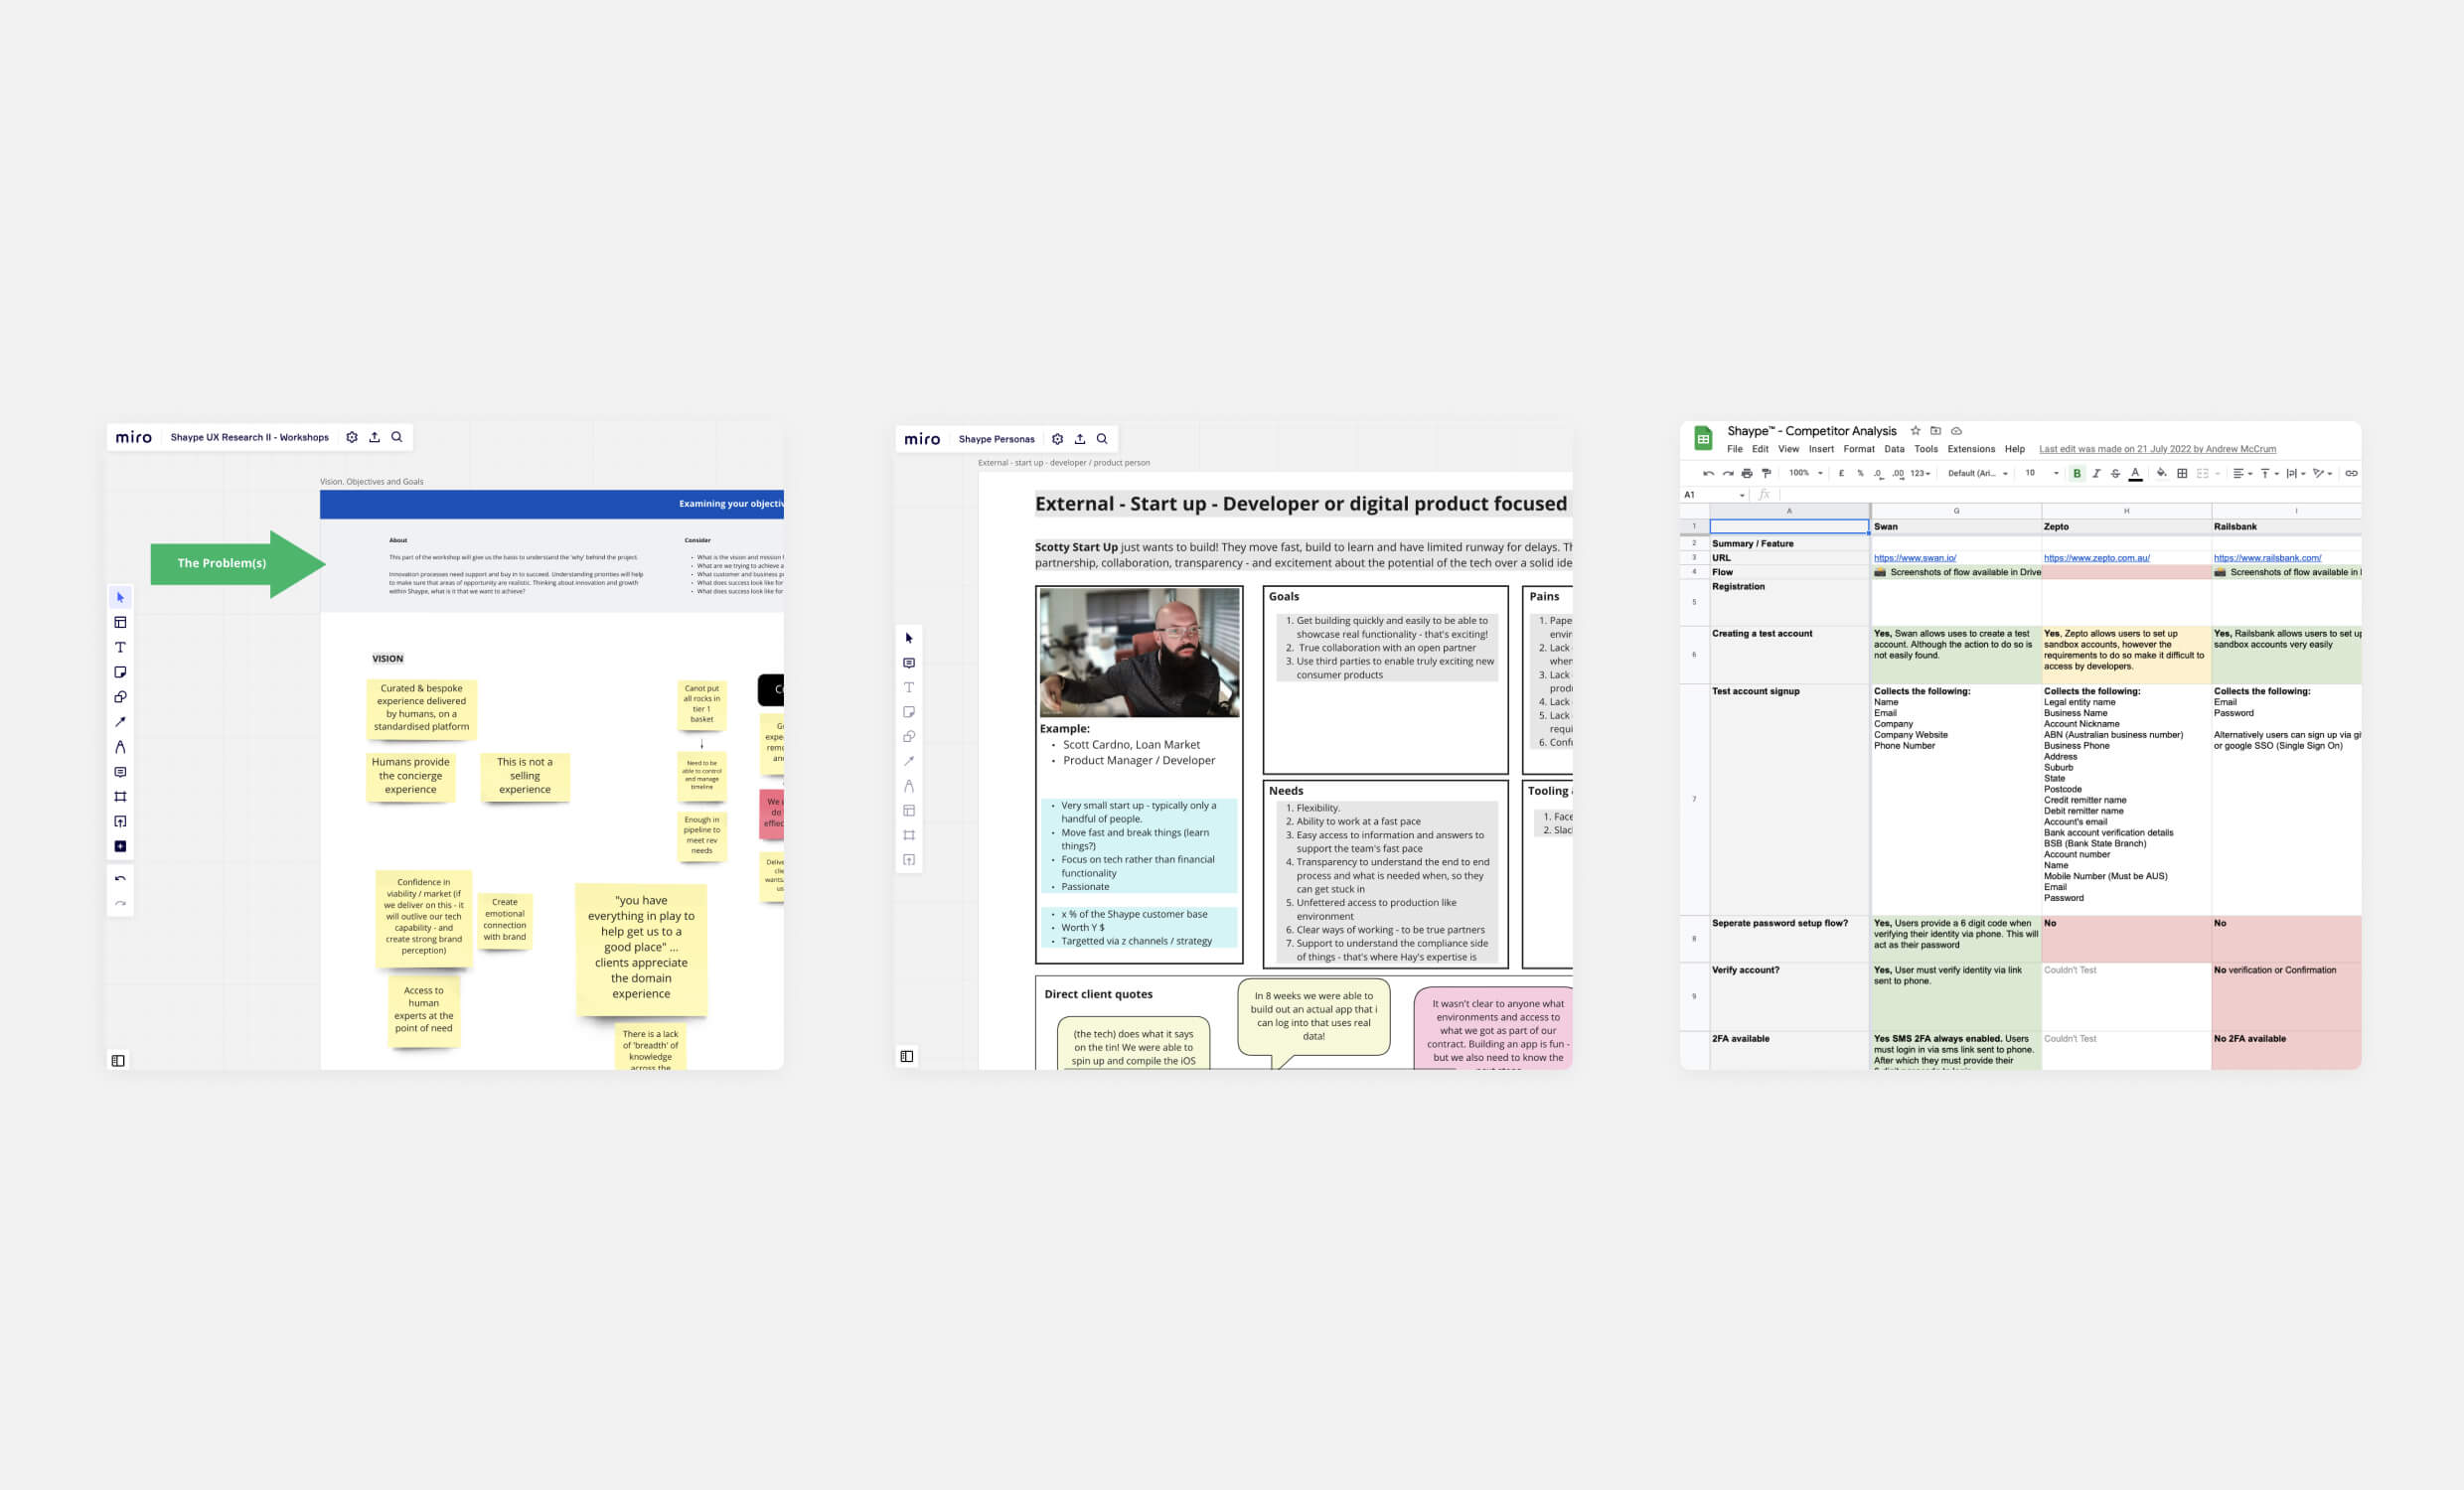 Three images showing Miro planning and research boards and a screenshot of the Shaype competitor analysis